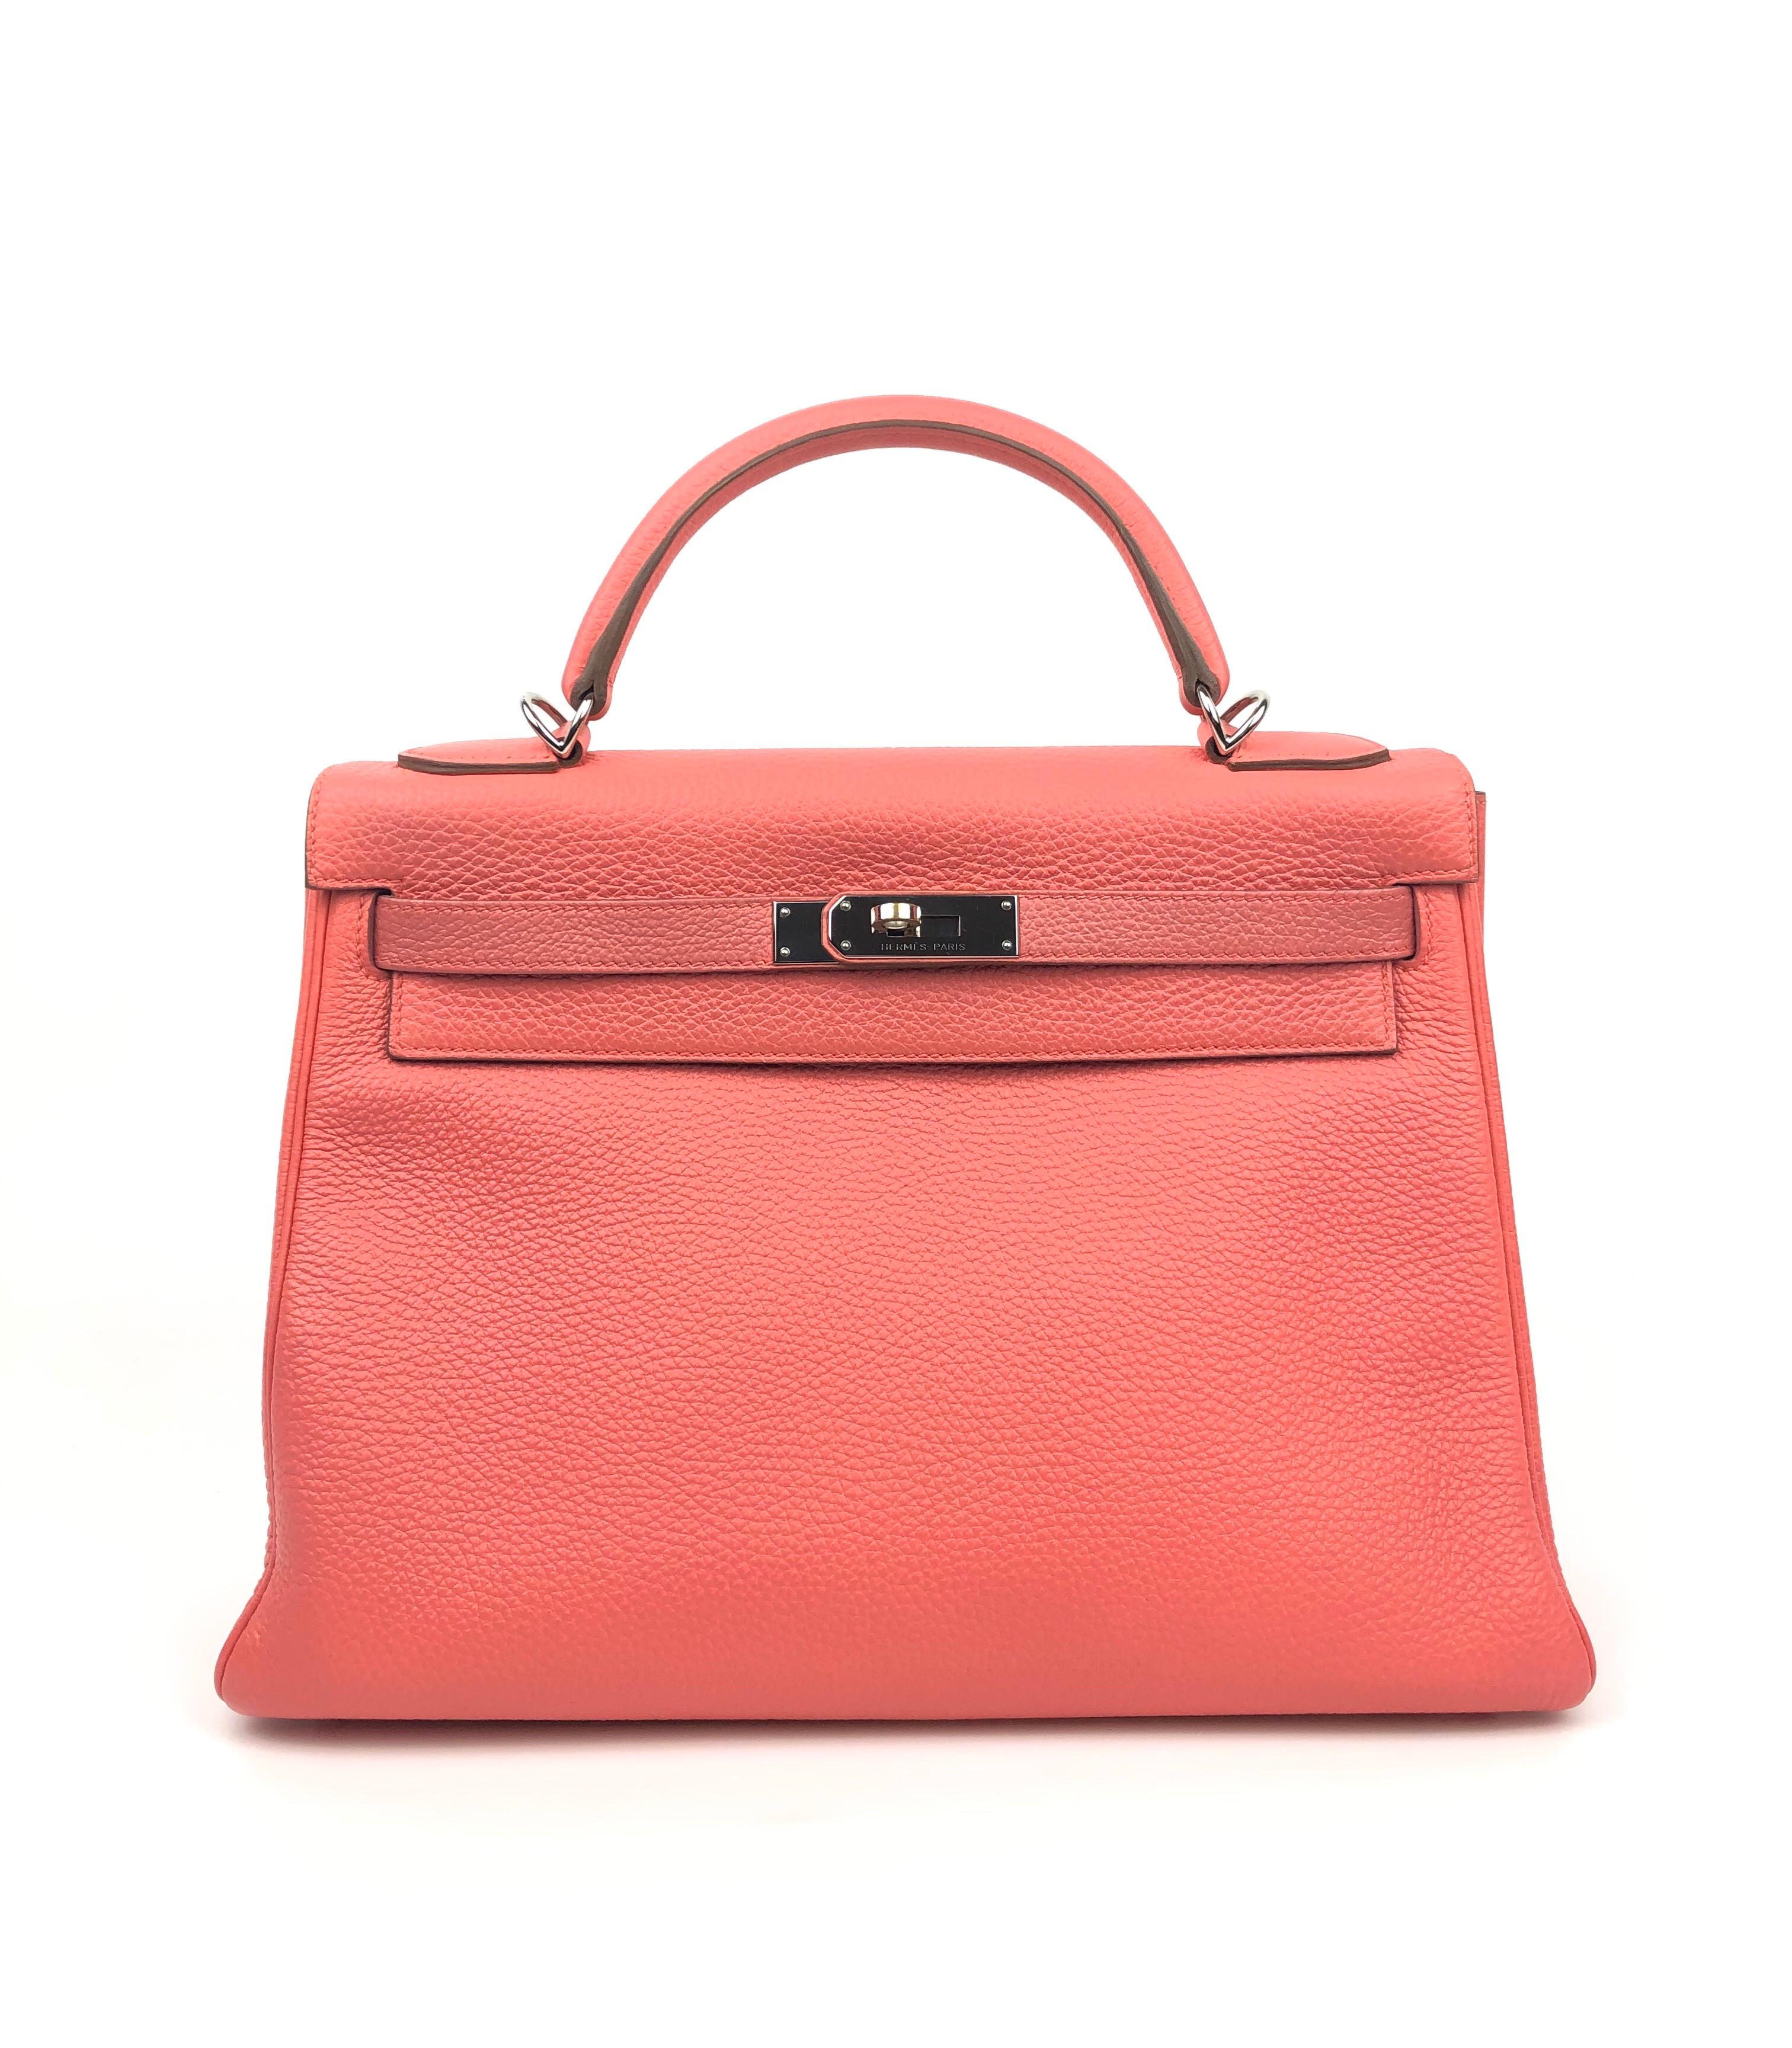 Hermes Kelly 32 Rose Lipstick Pink Togo Palladium Hardware. Excellent Condition, light hairlines on the hardware. Q stamp 2013.

Shop with confidence from Lux Addicts. Authenticity Guaranteed! 